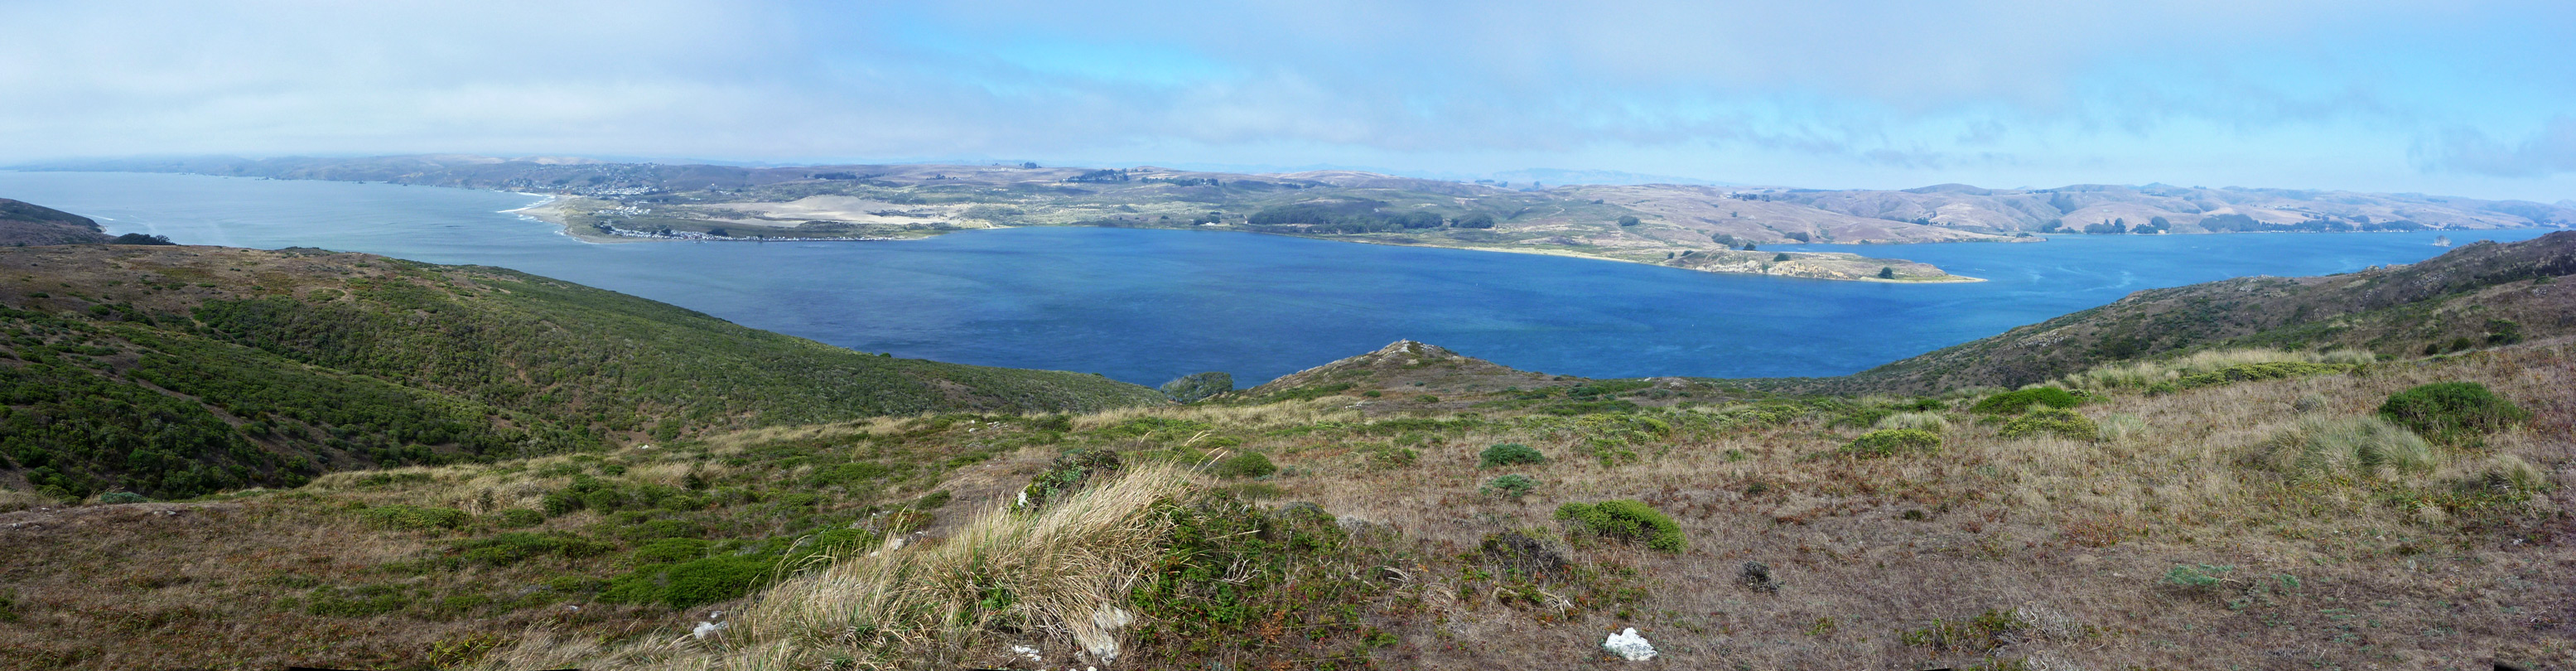 Northern end of Tomales Bay